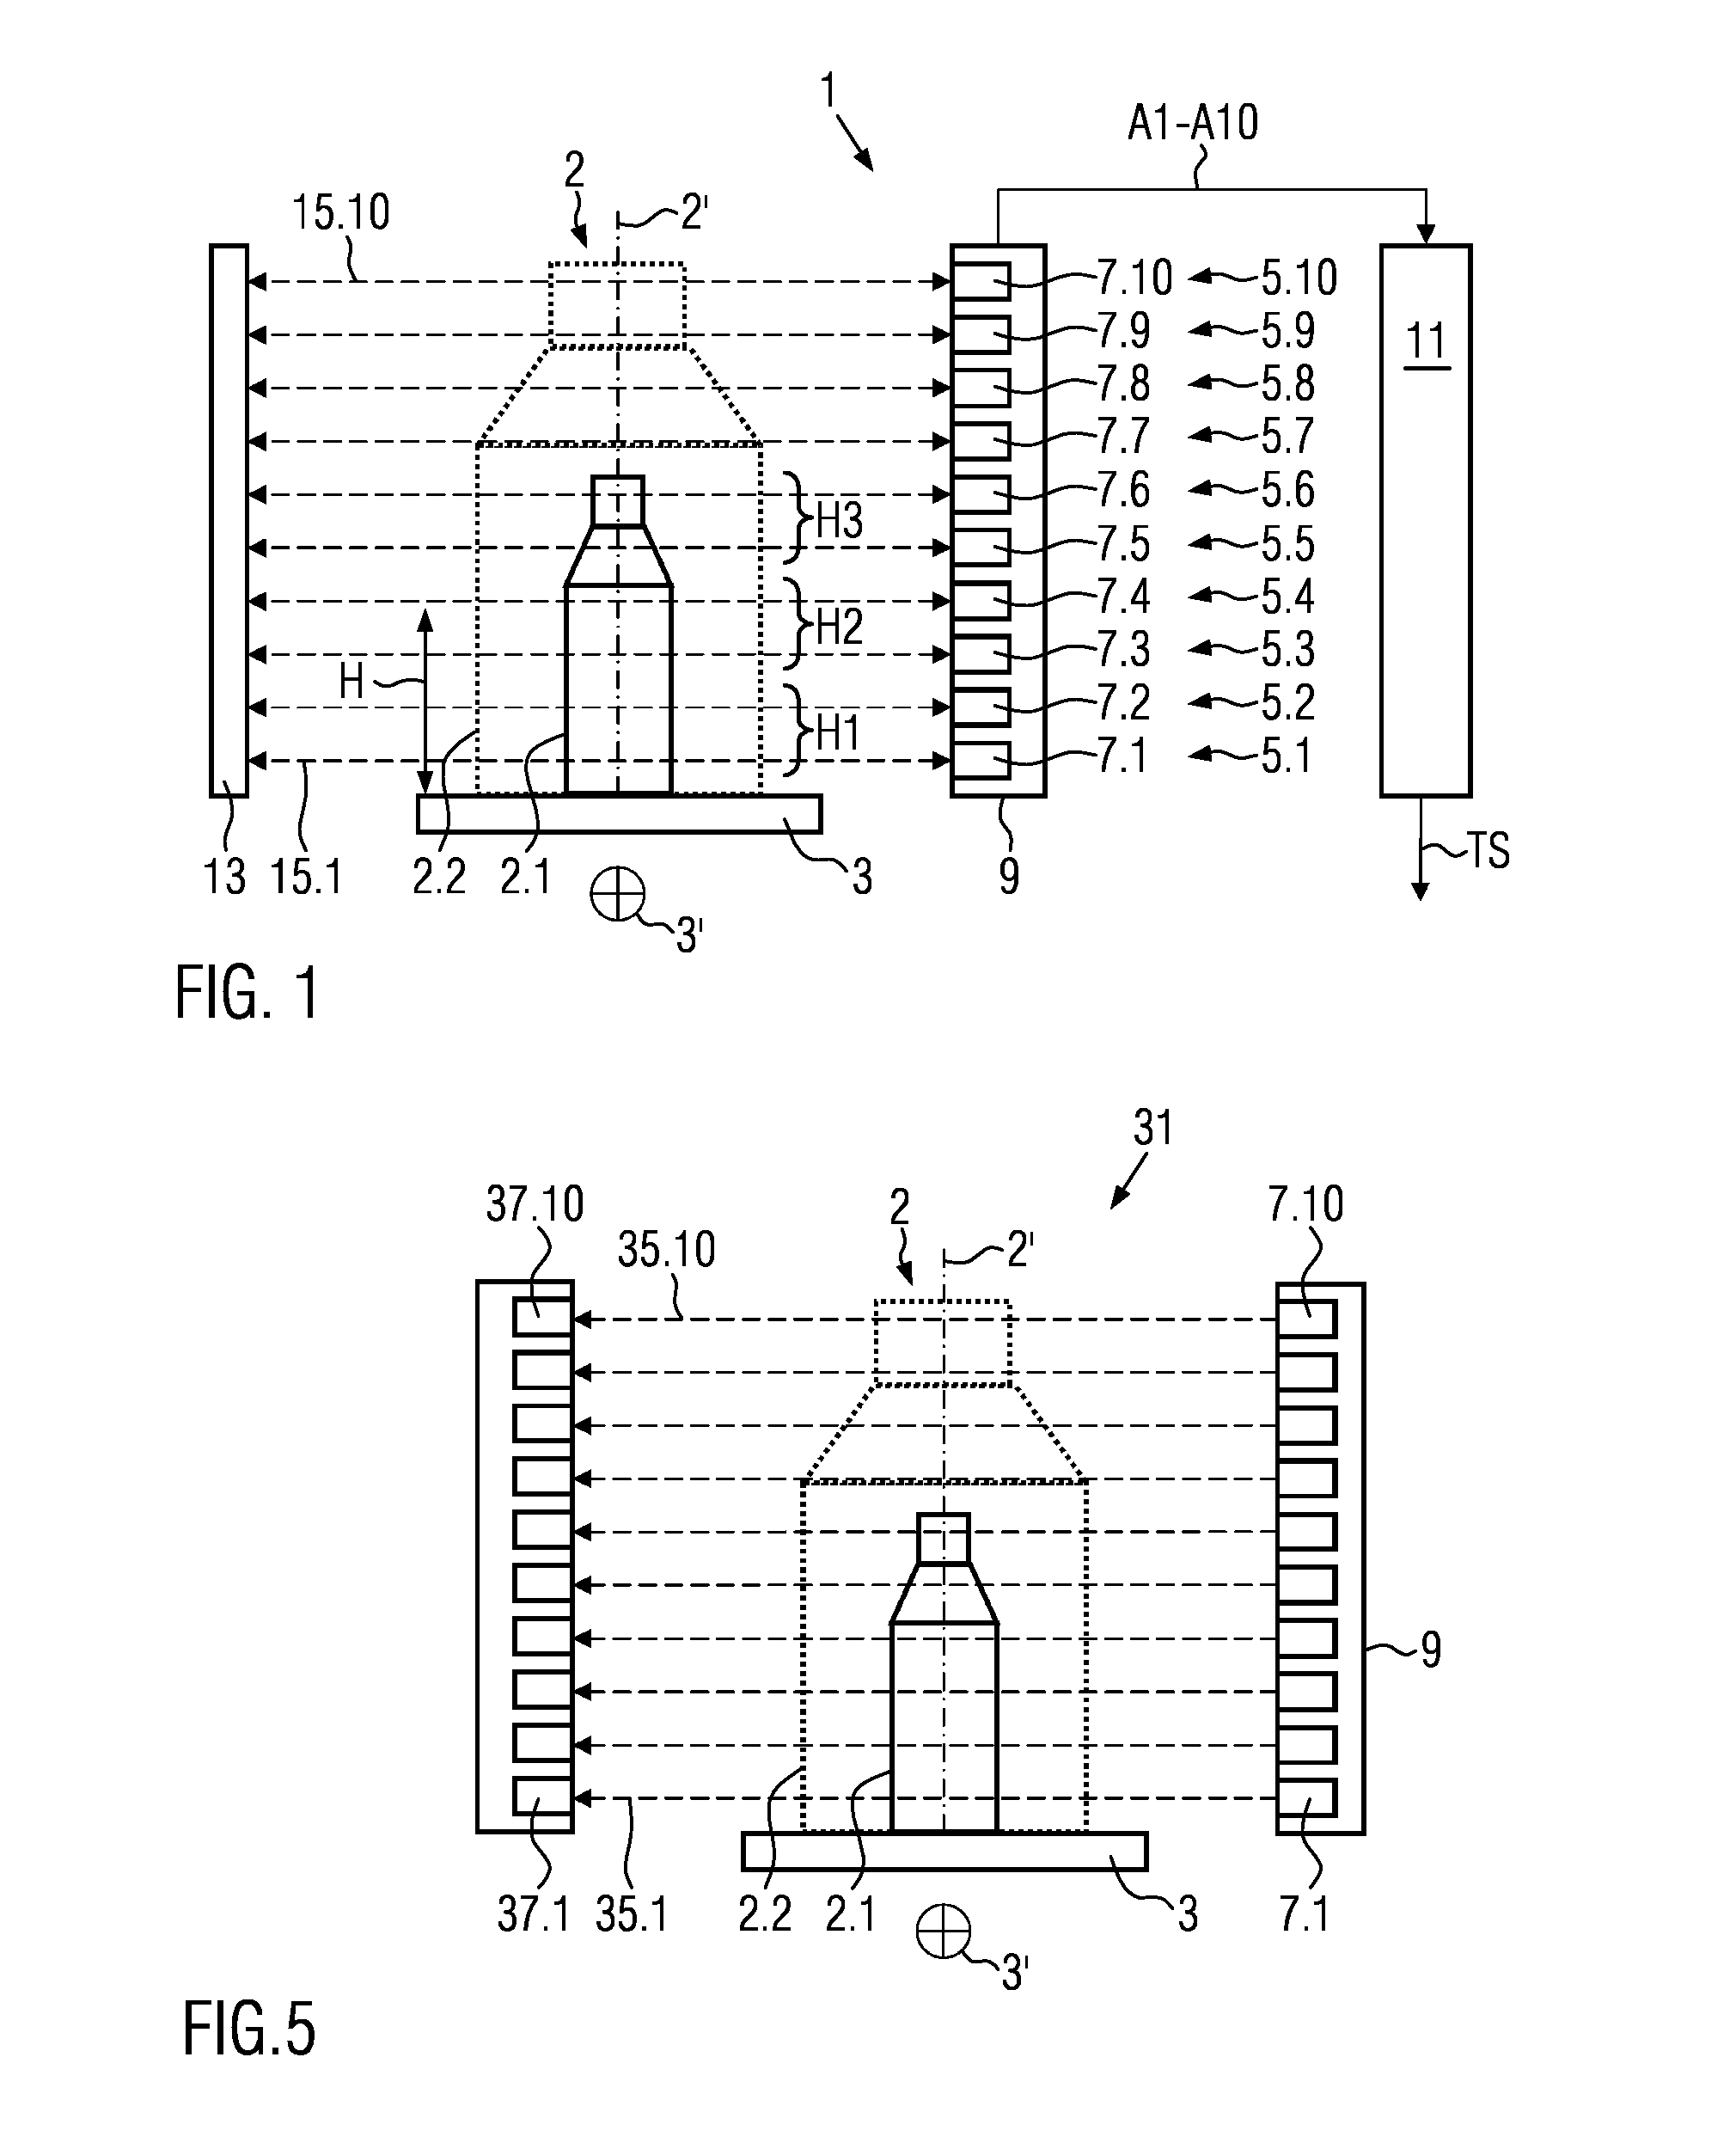 Triggering light grid and method for determining the position of containers